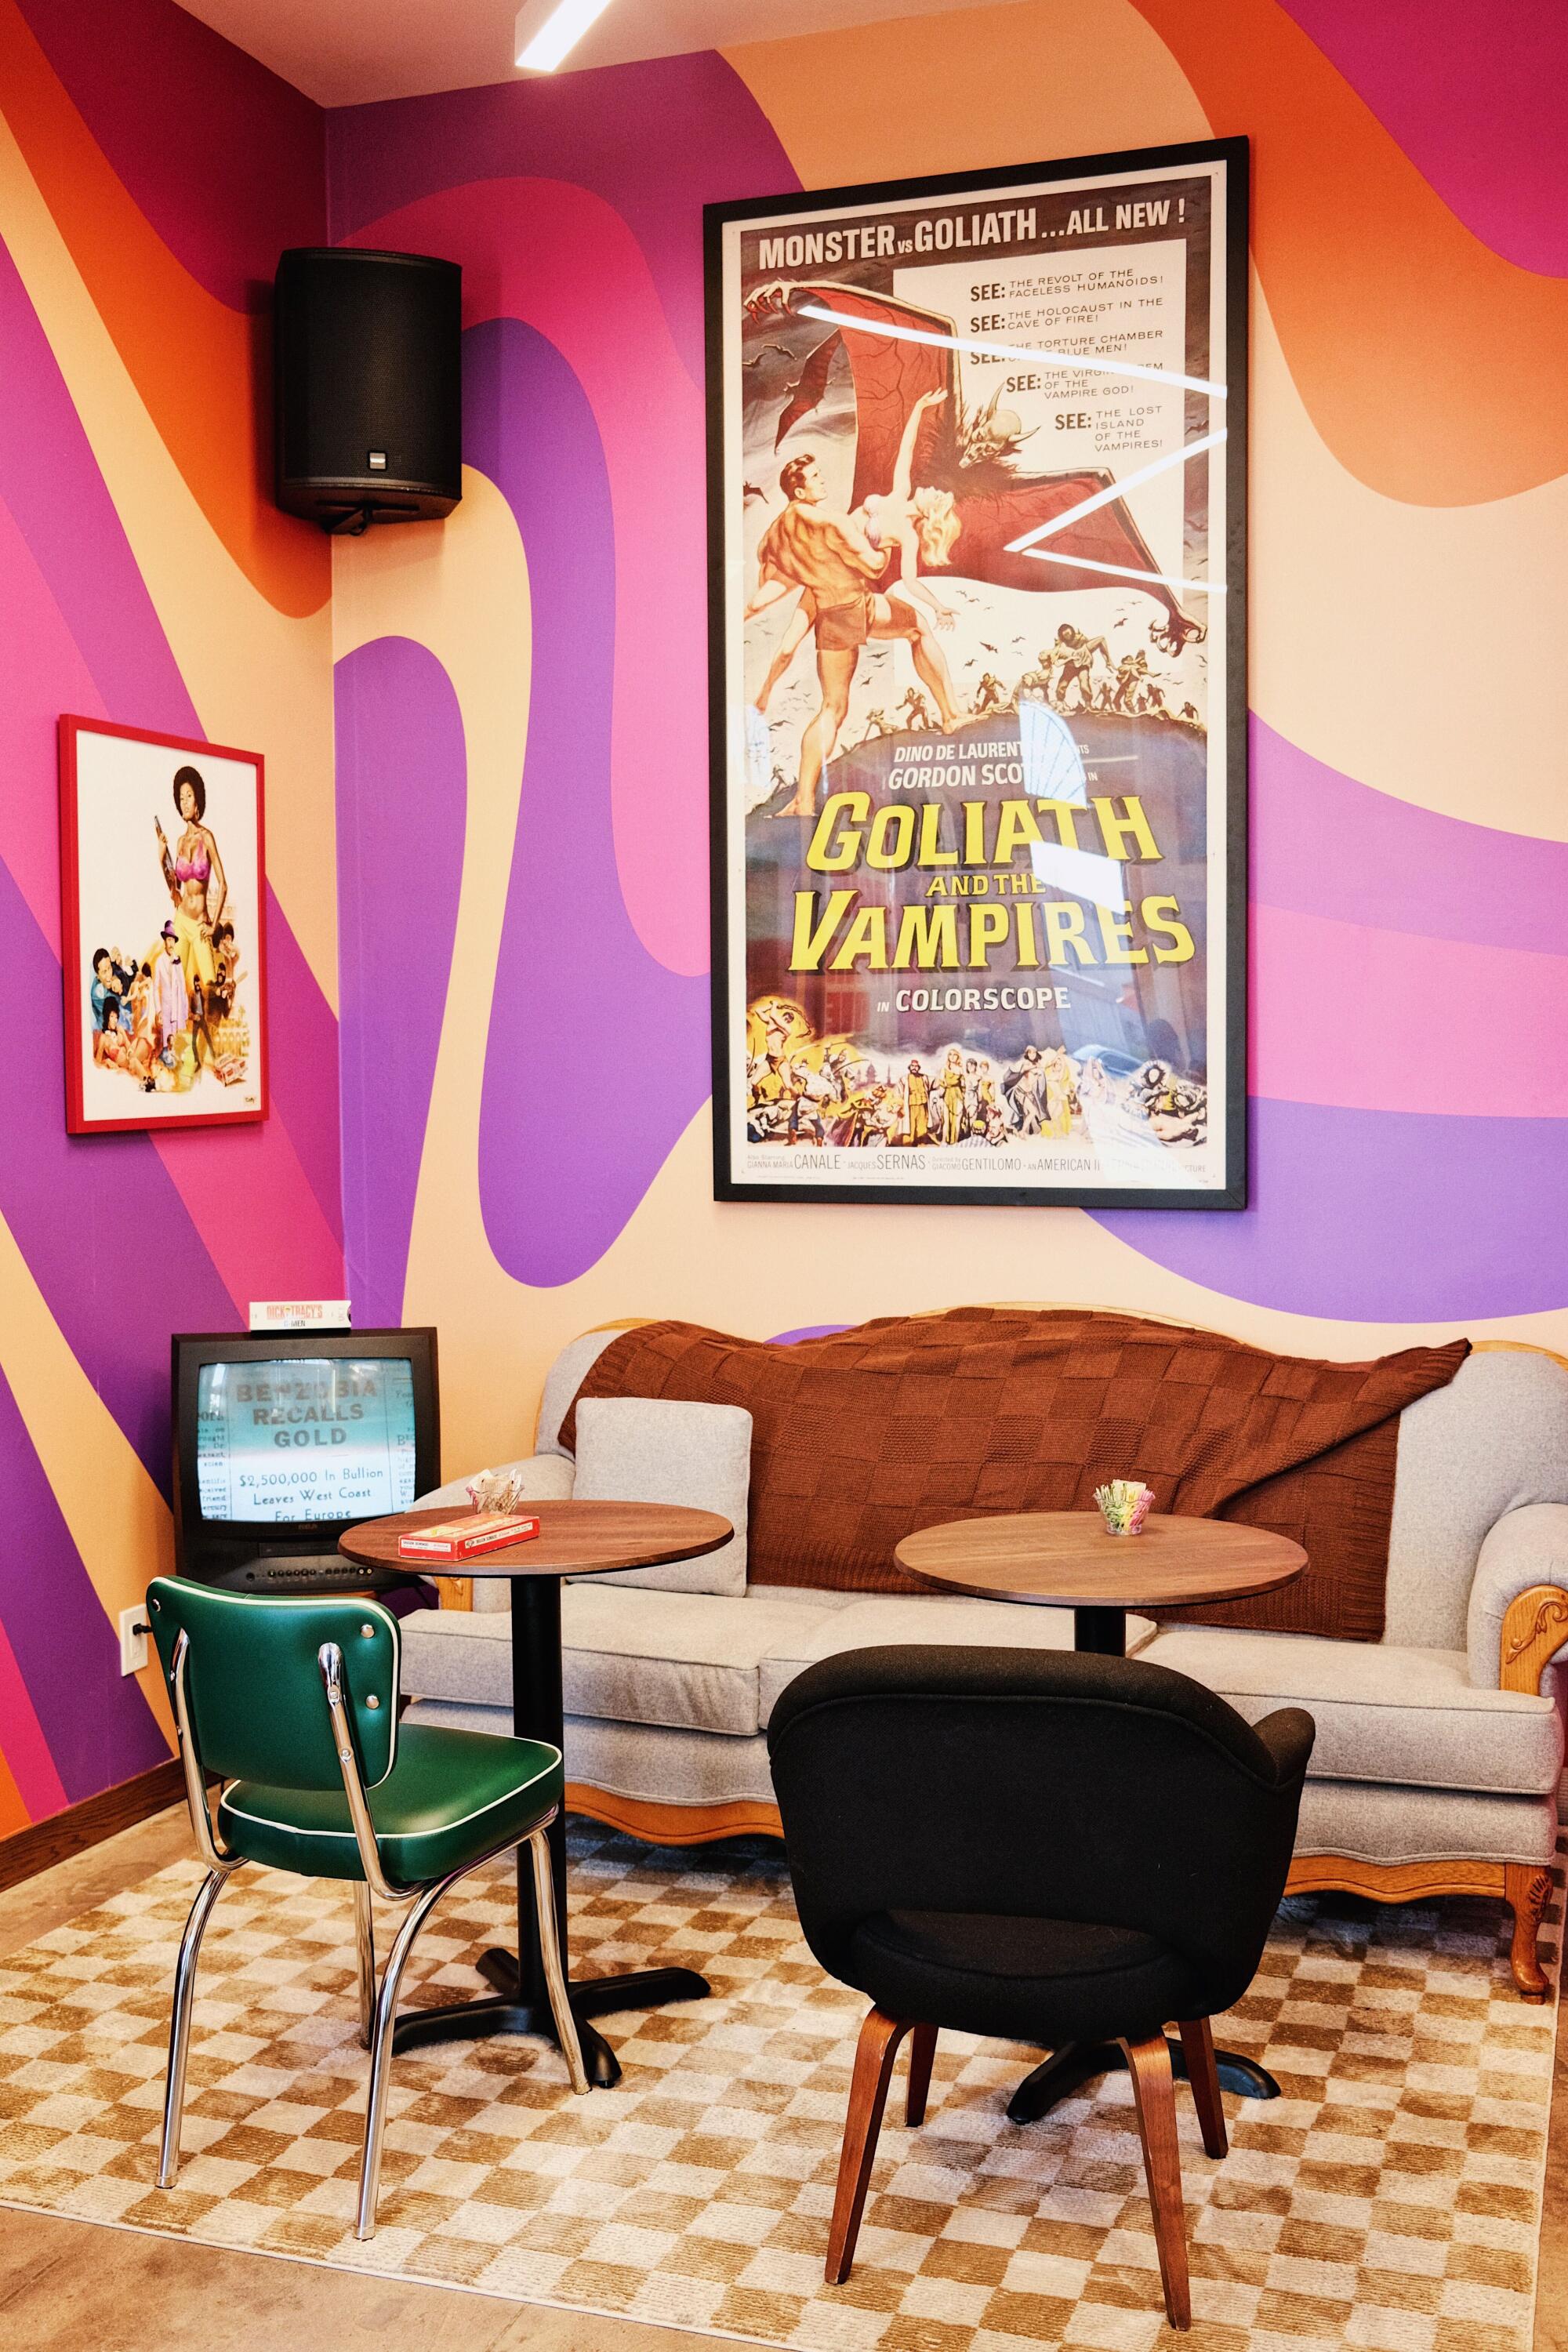 A couch, cafe tables and chairs in front of a colorful wall hung with movie posters